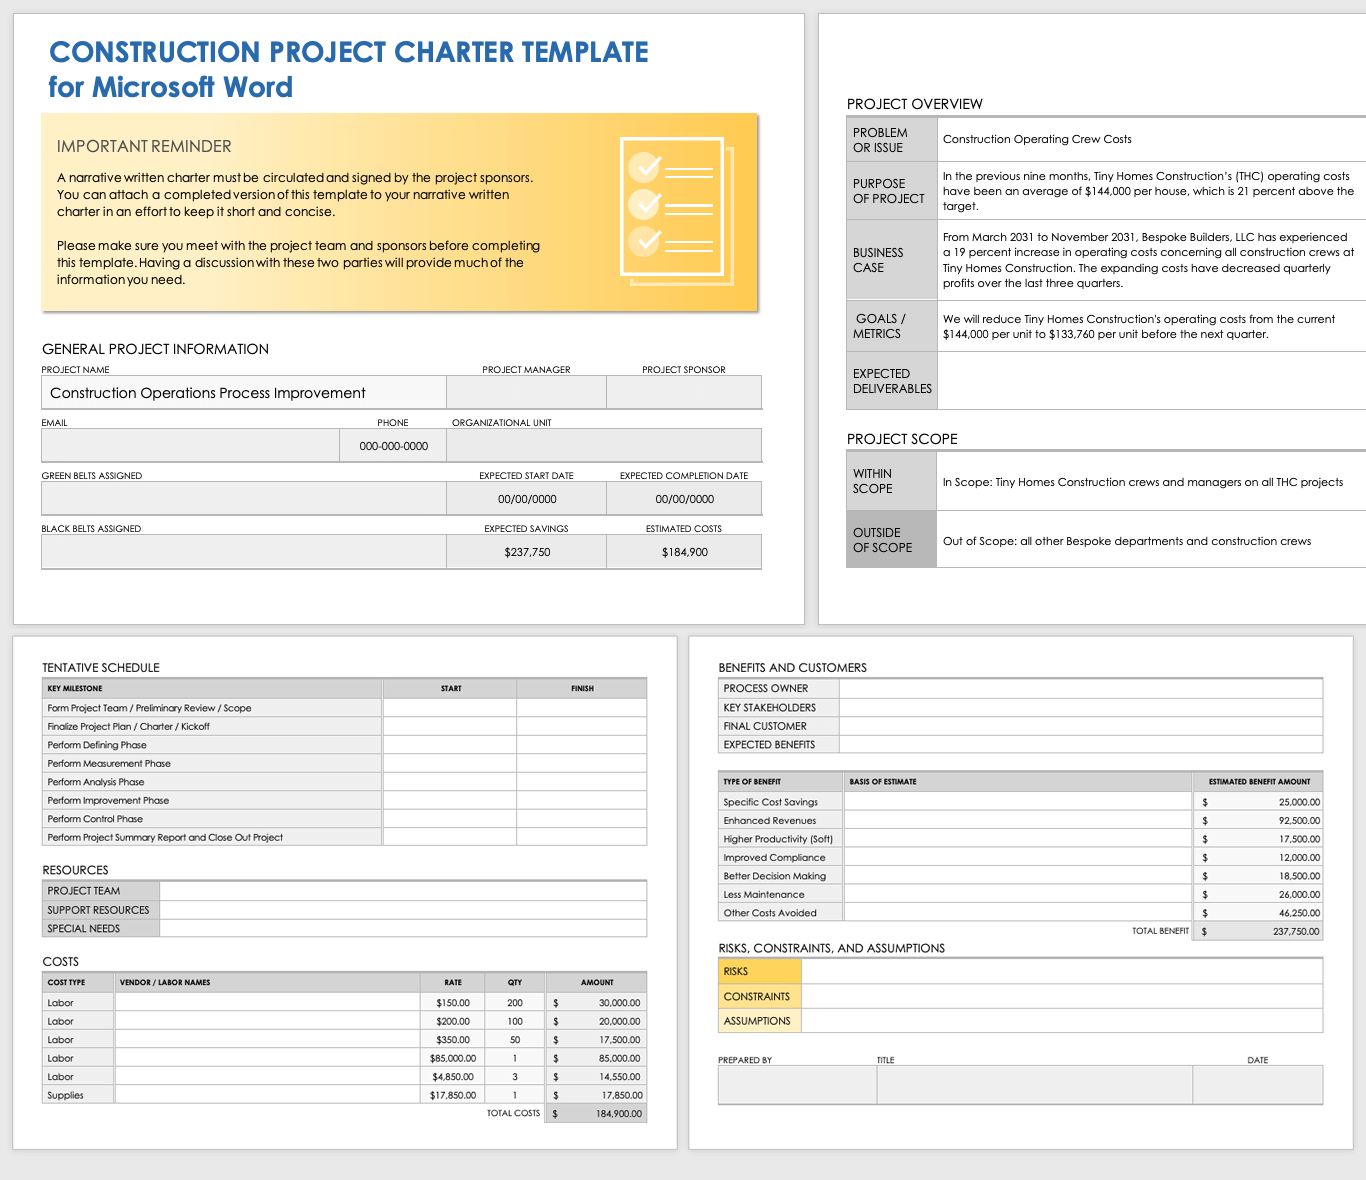 Construction Project Charter Template for Microsoft Word